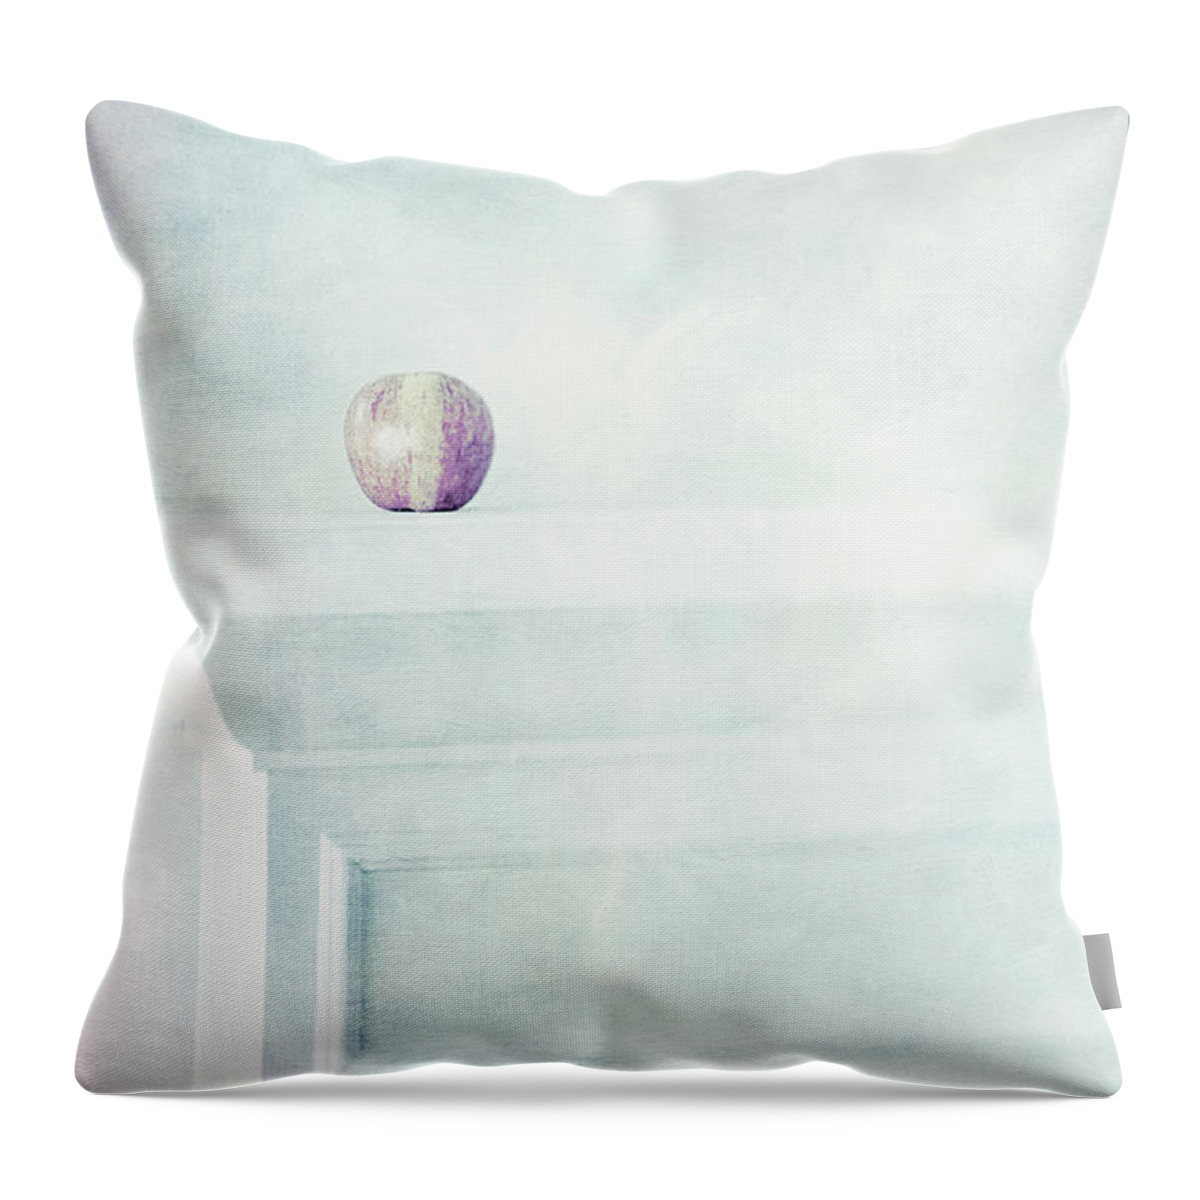 Color Throw Pillow featuring the photograph Fuji Apple on White Fireplace Mantel by YoPedro